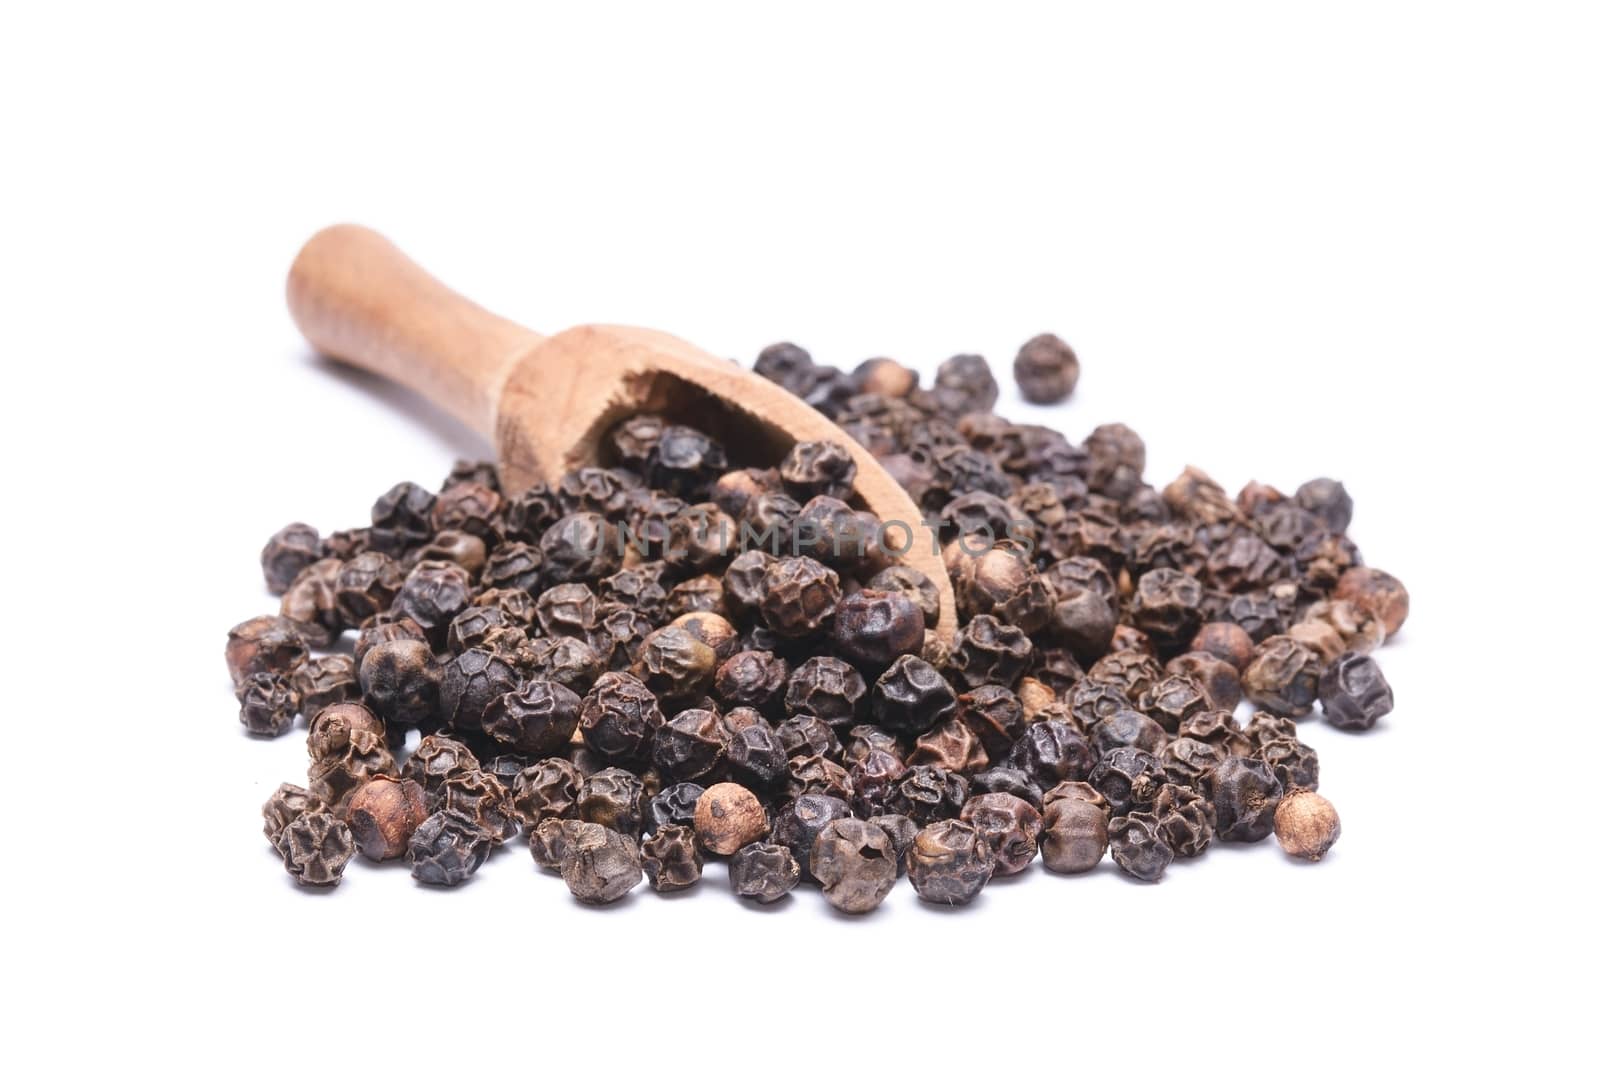 Black peppercorns isolated on white background